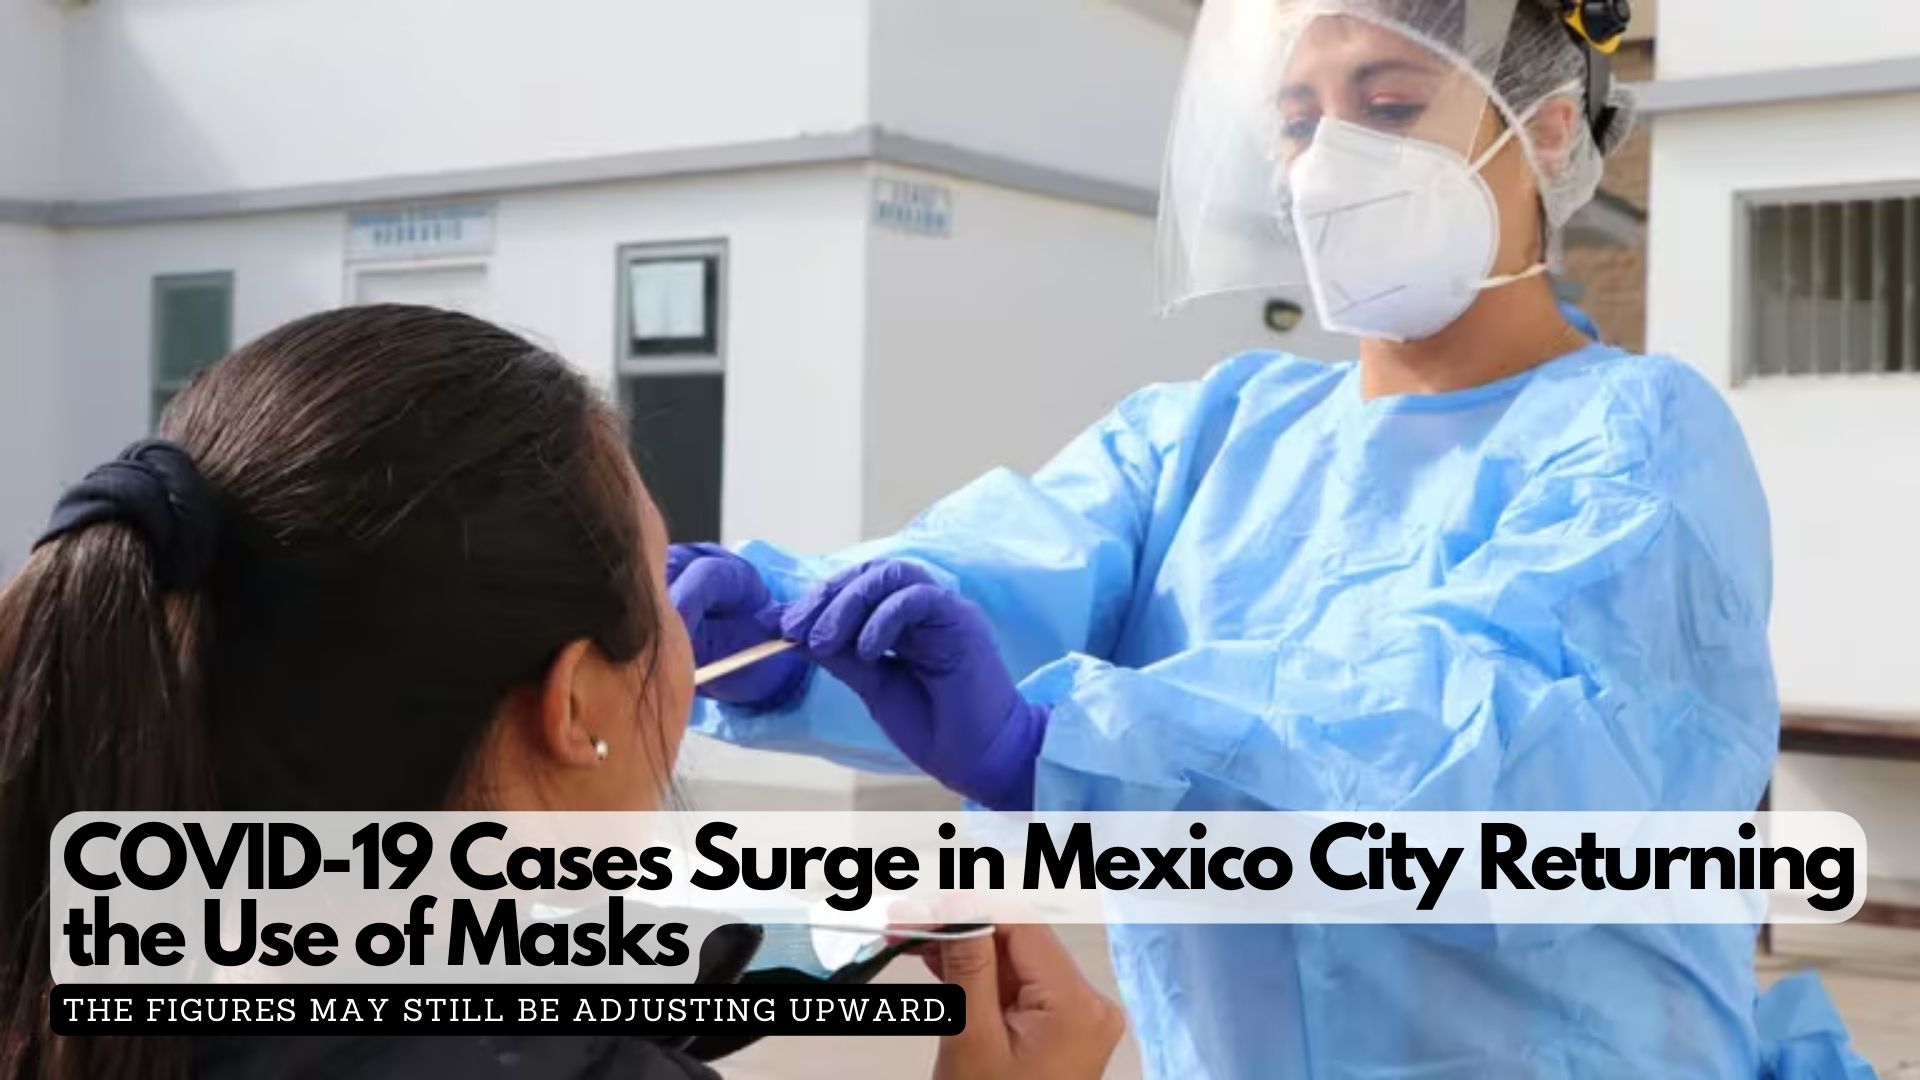 COVID-19 Cases Surge in Mexico City Returning the Use of Masks